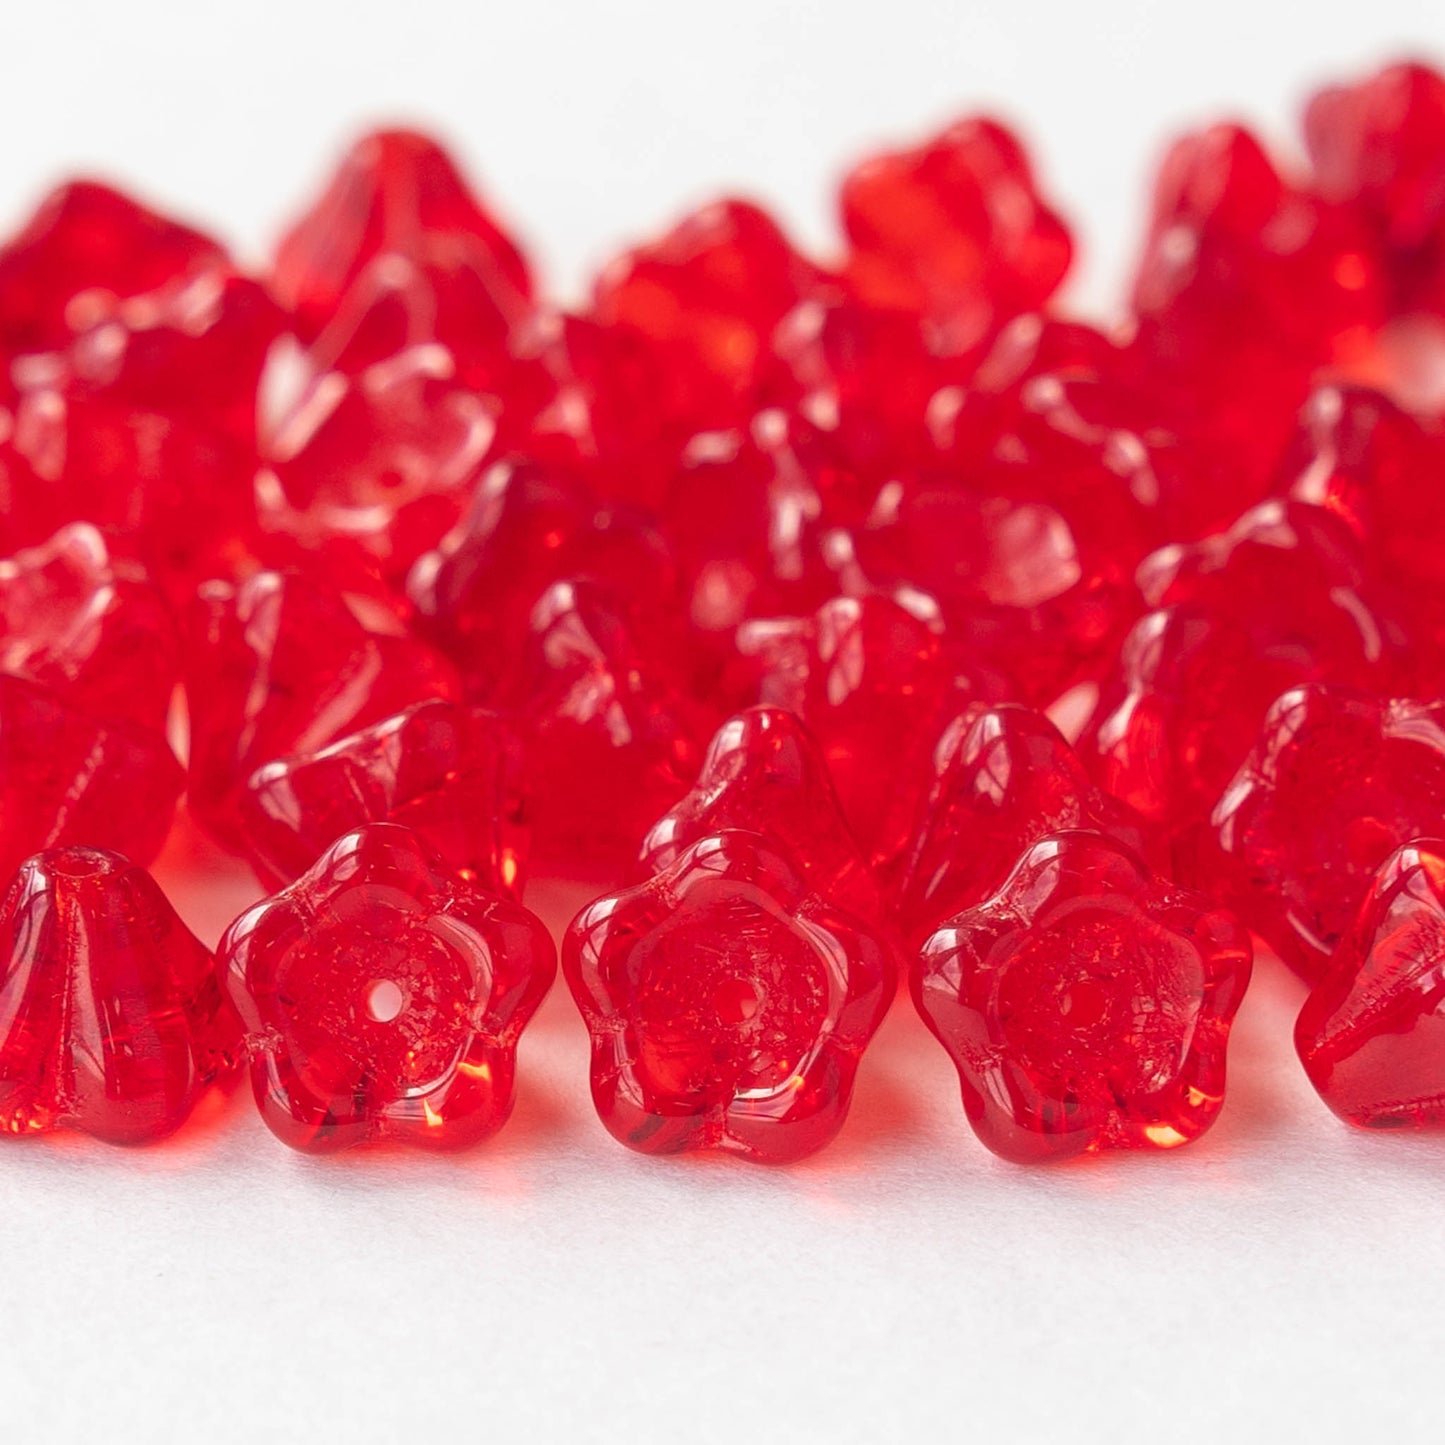 6mm Glass Flower Beads - Transparent Red - 50 beads